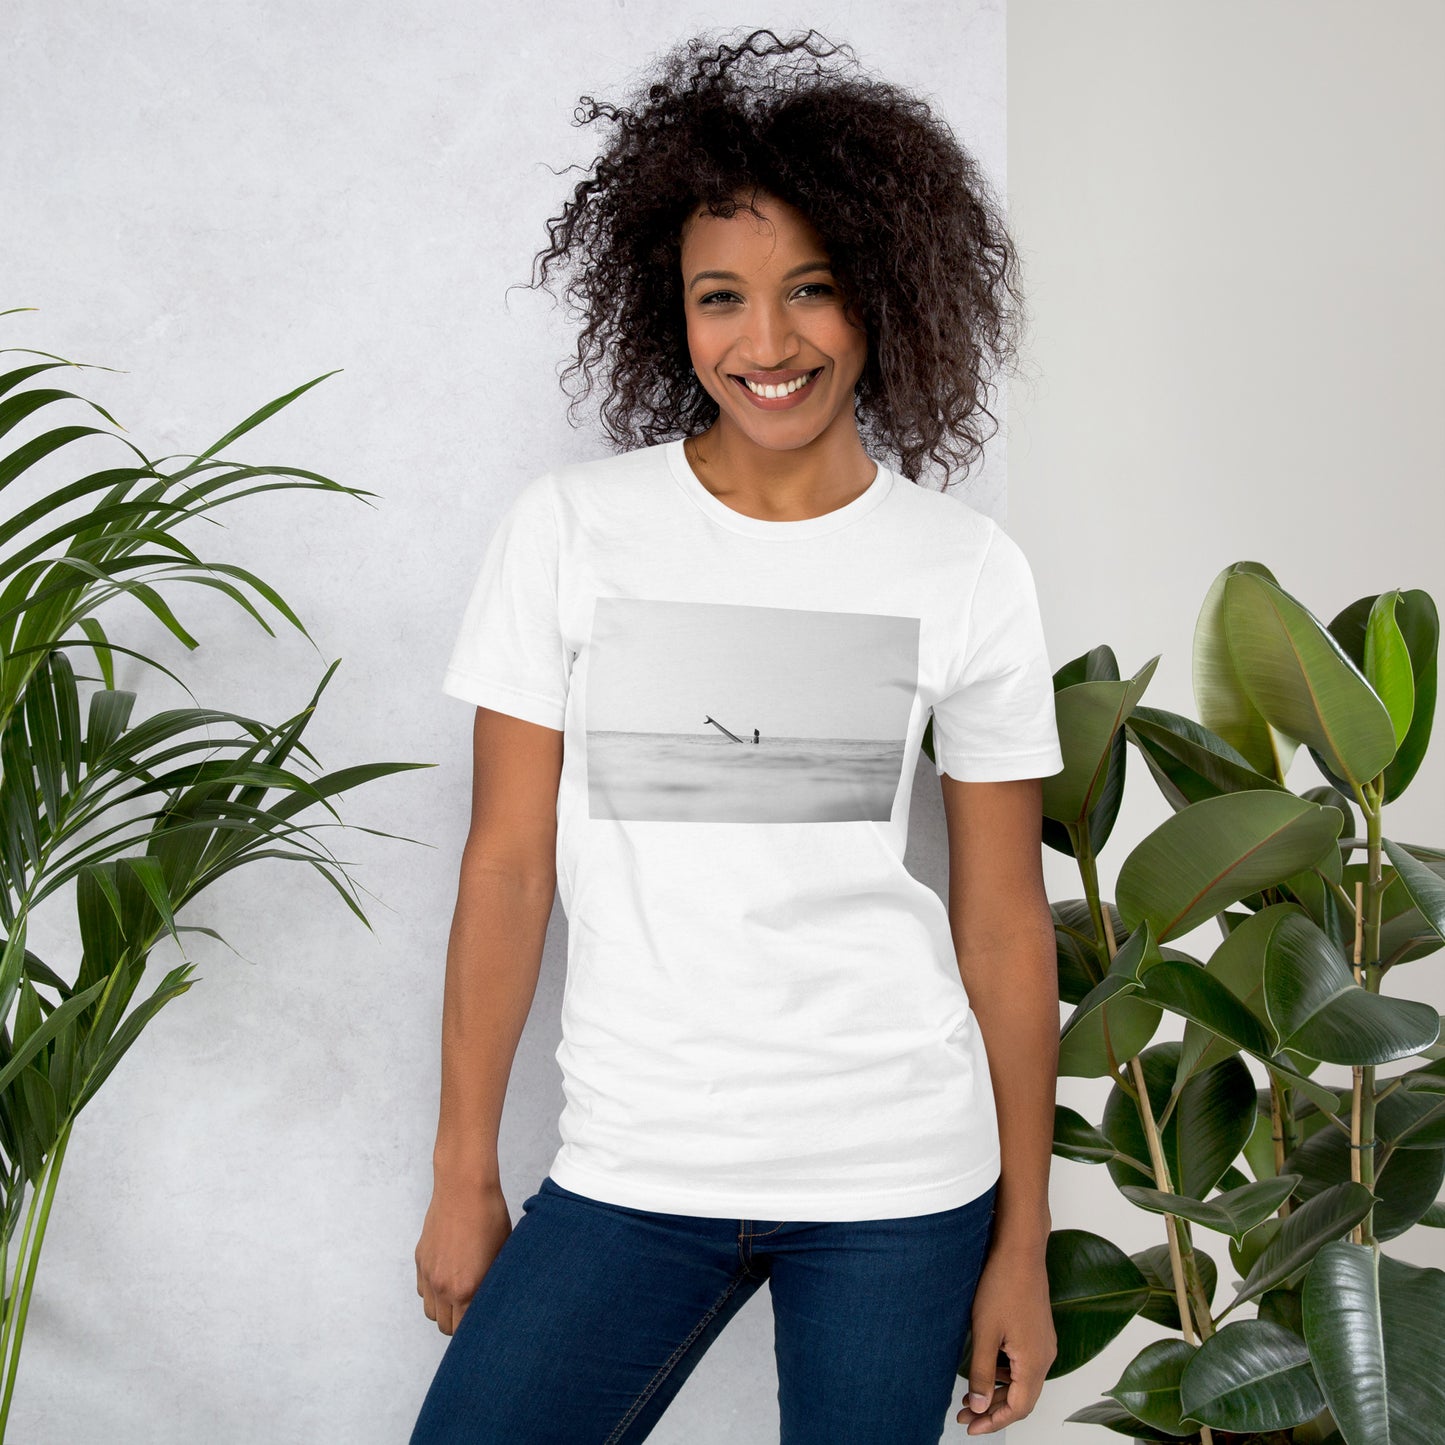 Unisex Tee - "Bottoms Up Club" by Joy Armstrong